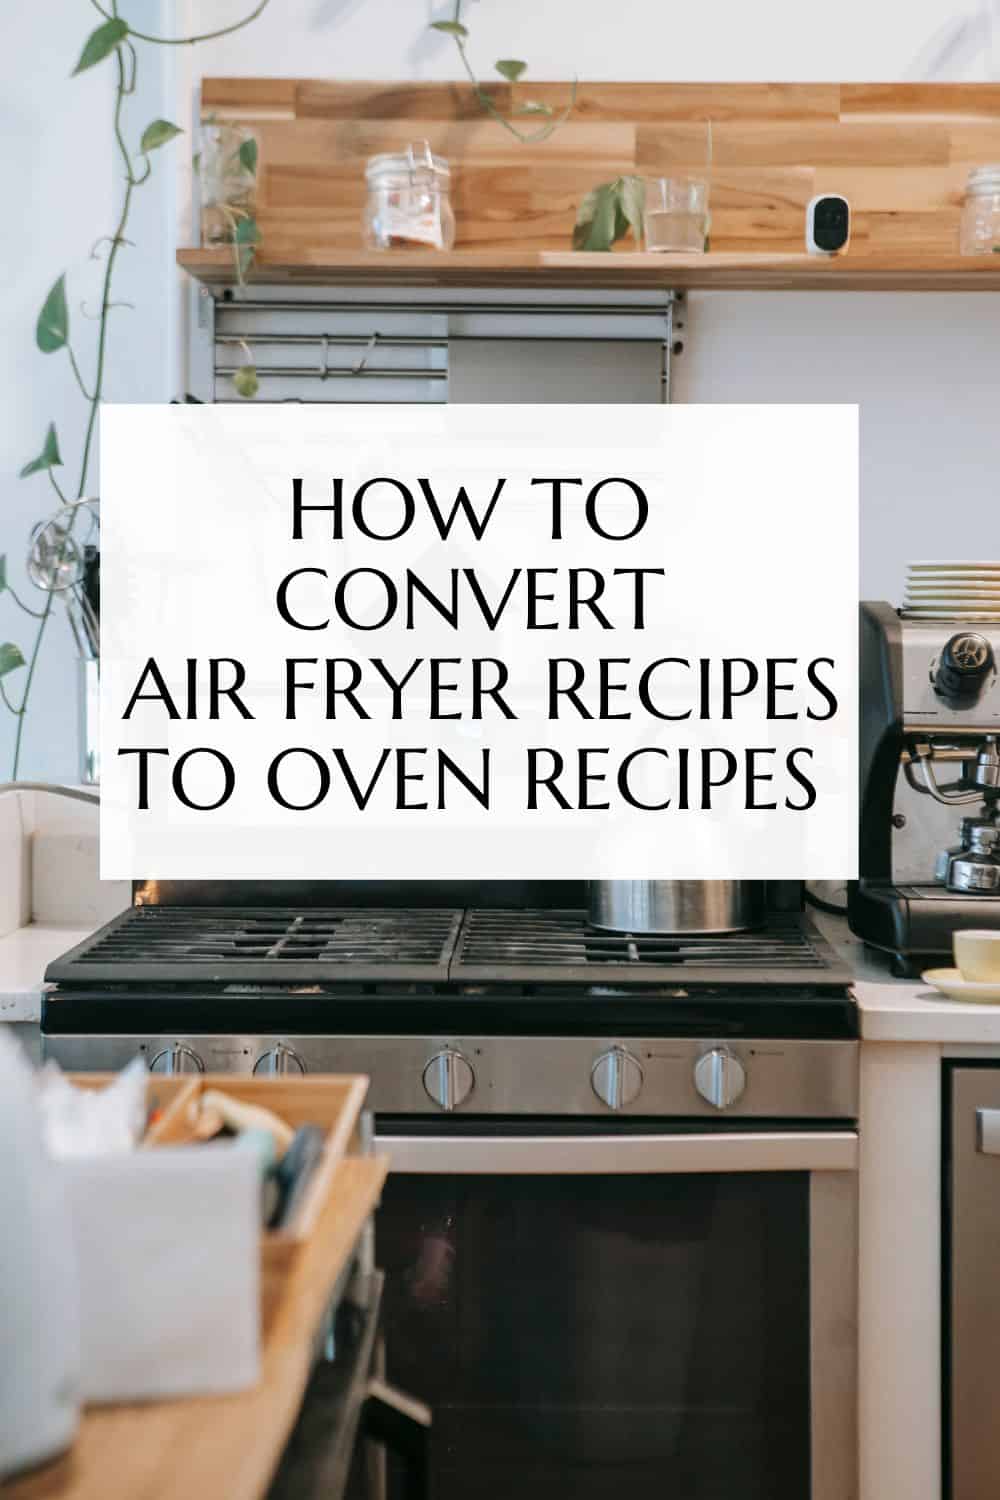 An image of a gas oven in a kitchen with text overlaying the image that says "How to Convert Air Fryer Recipes to Oven Recipes"